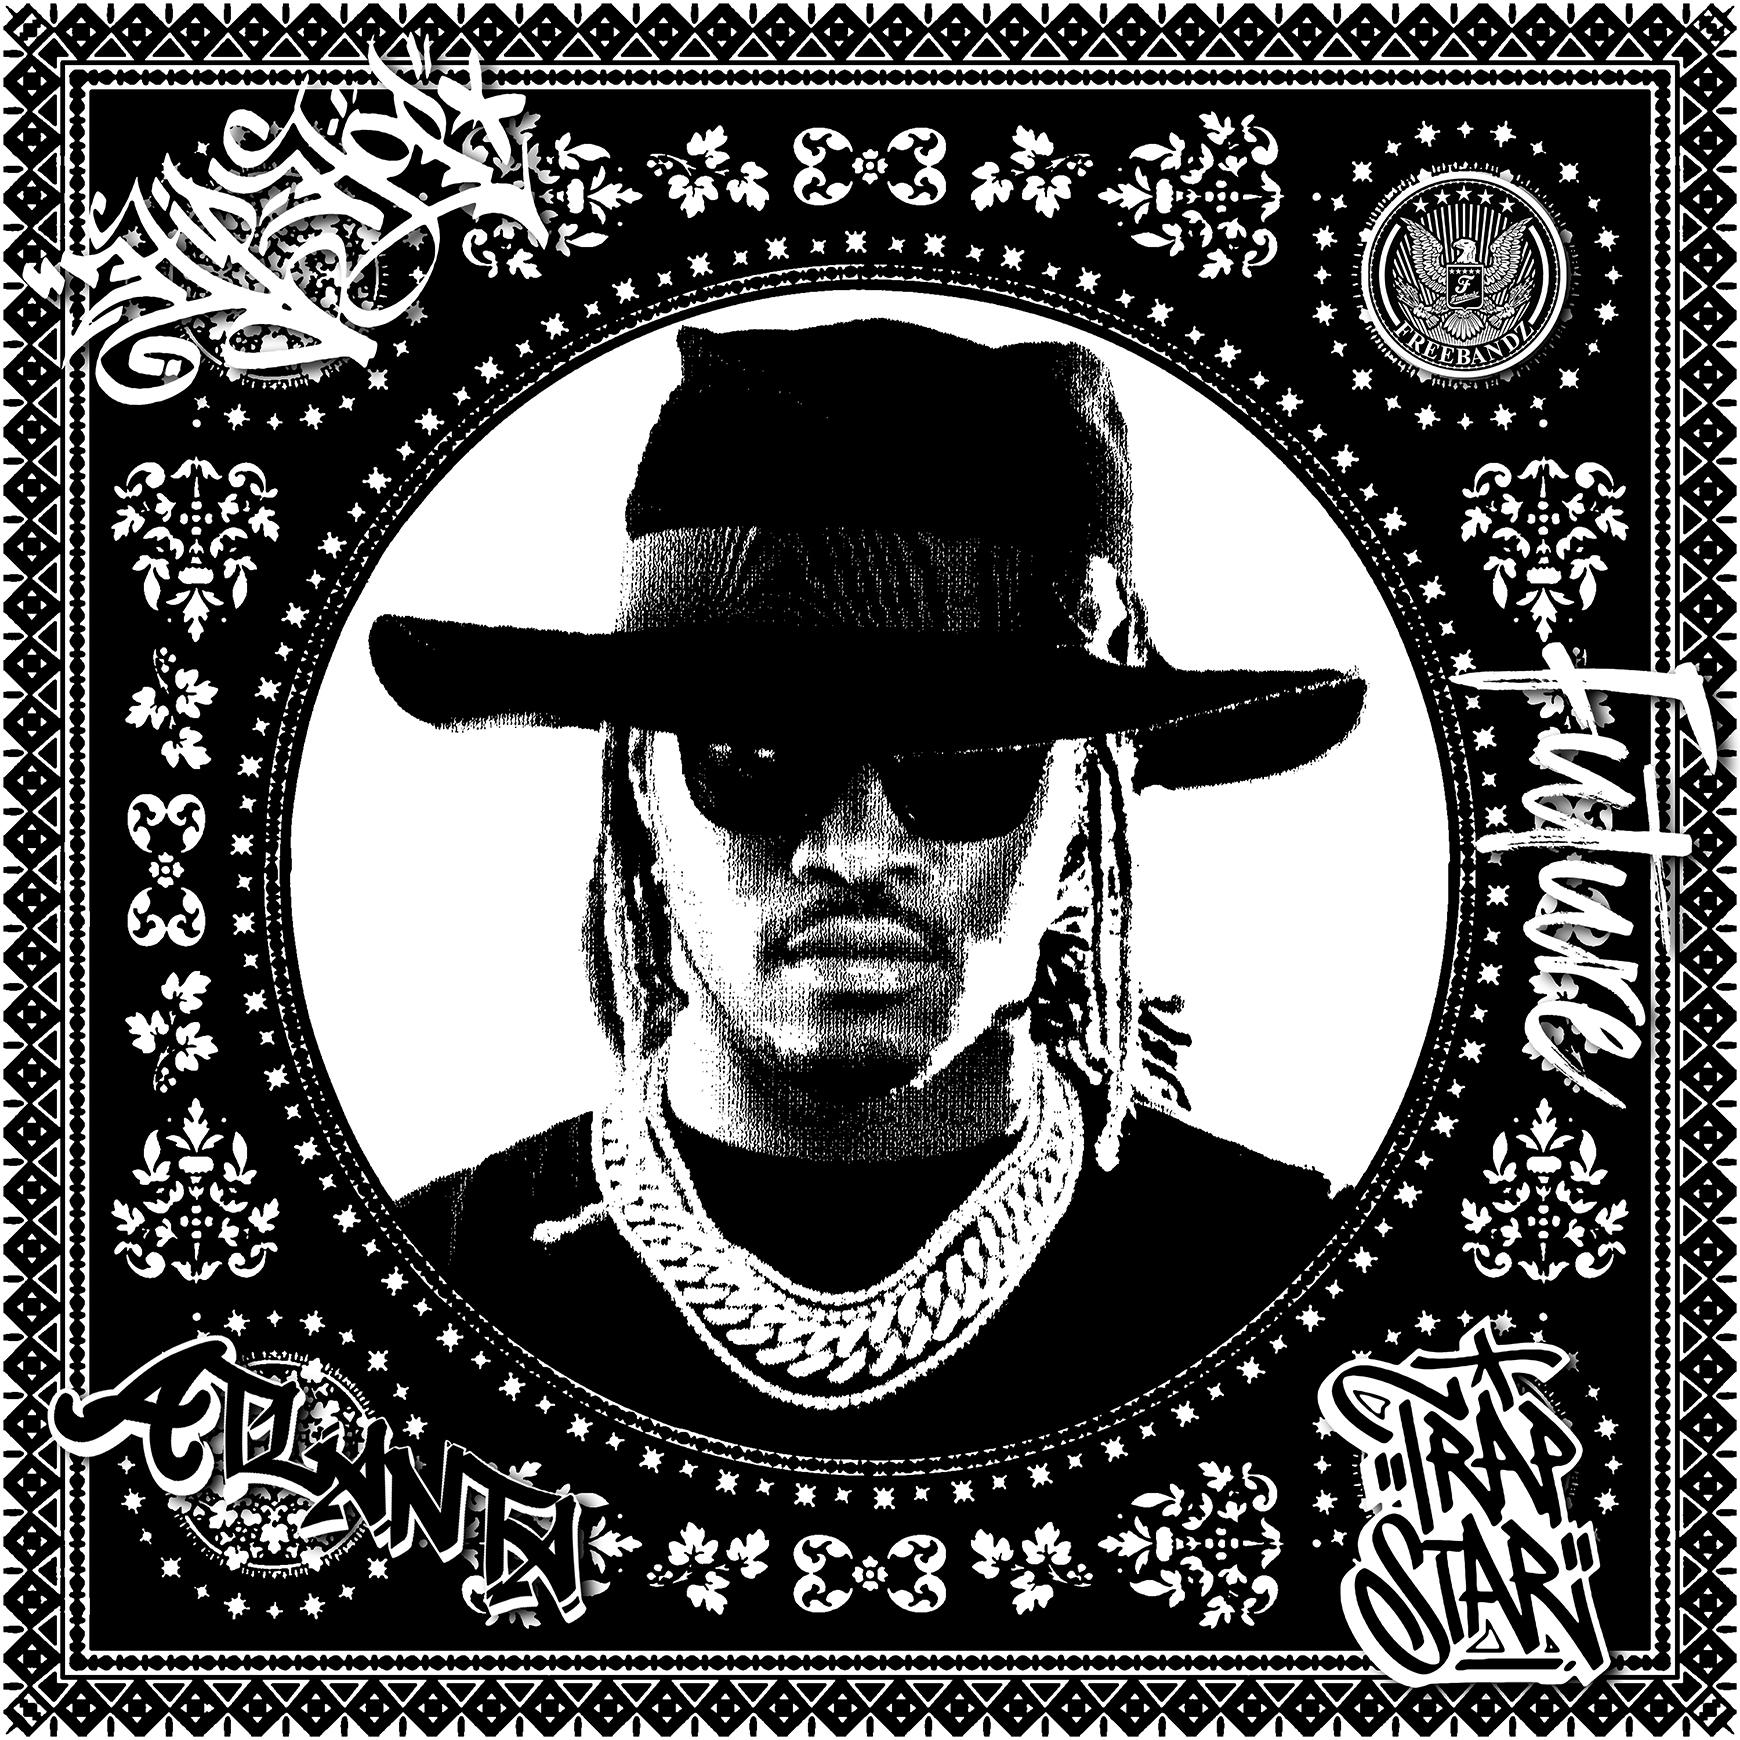 Future (Black & White)(50 Years, Hip Hop, Rap, Iconic, Artist, Musician, Rapper) - Print by Agent X